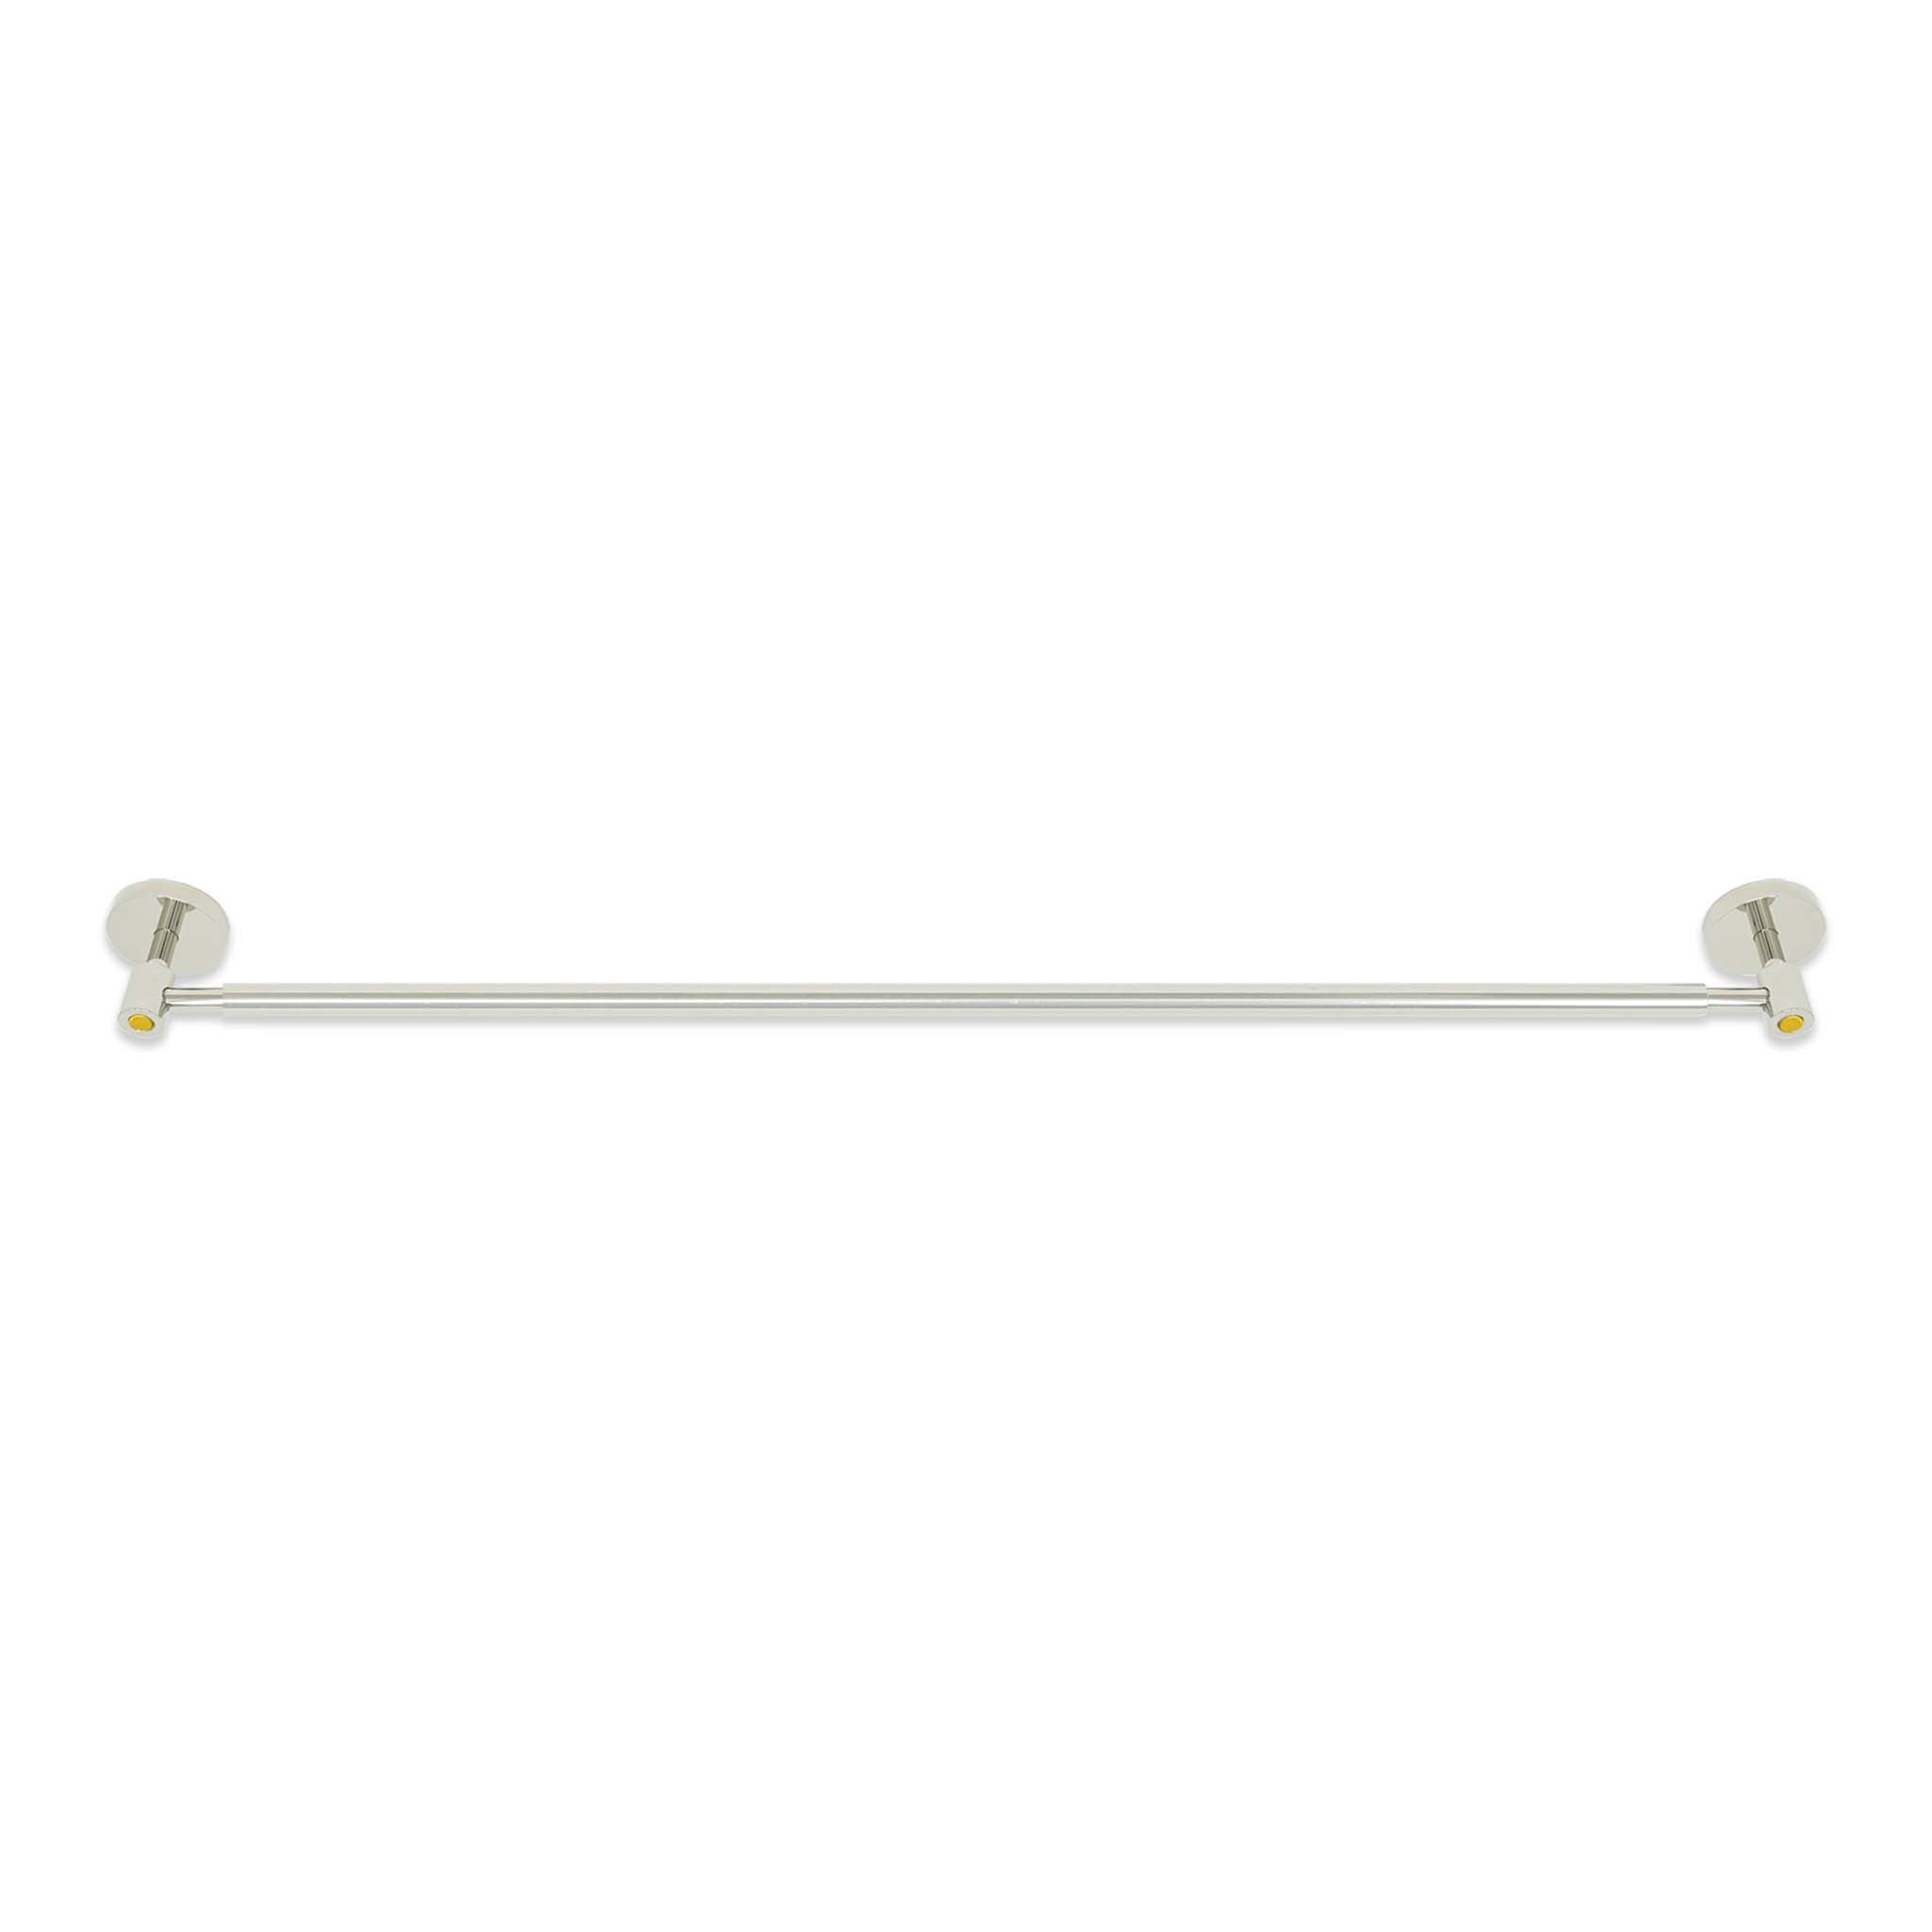 Nickel and ochre color Head towel bar 24" Dutton Brown hardware